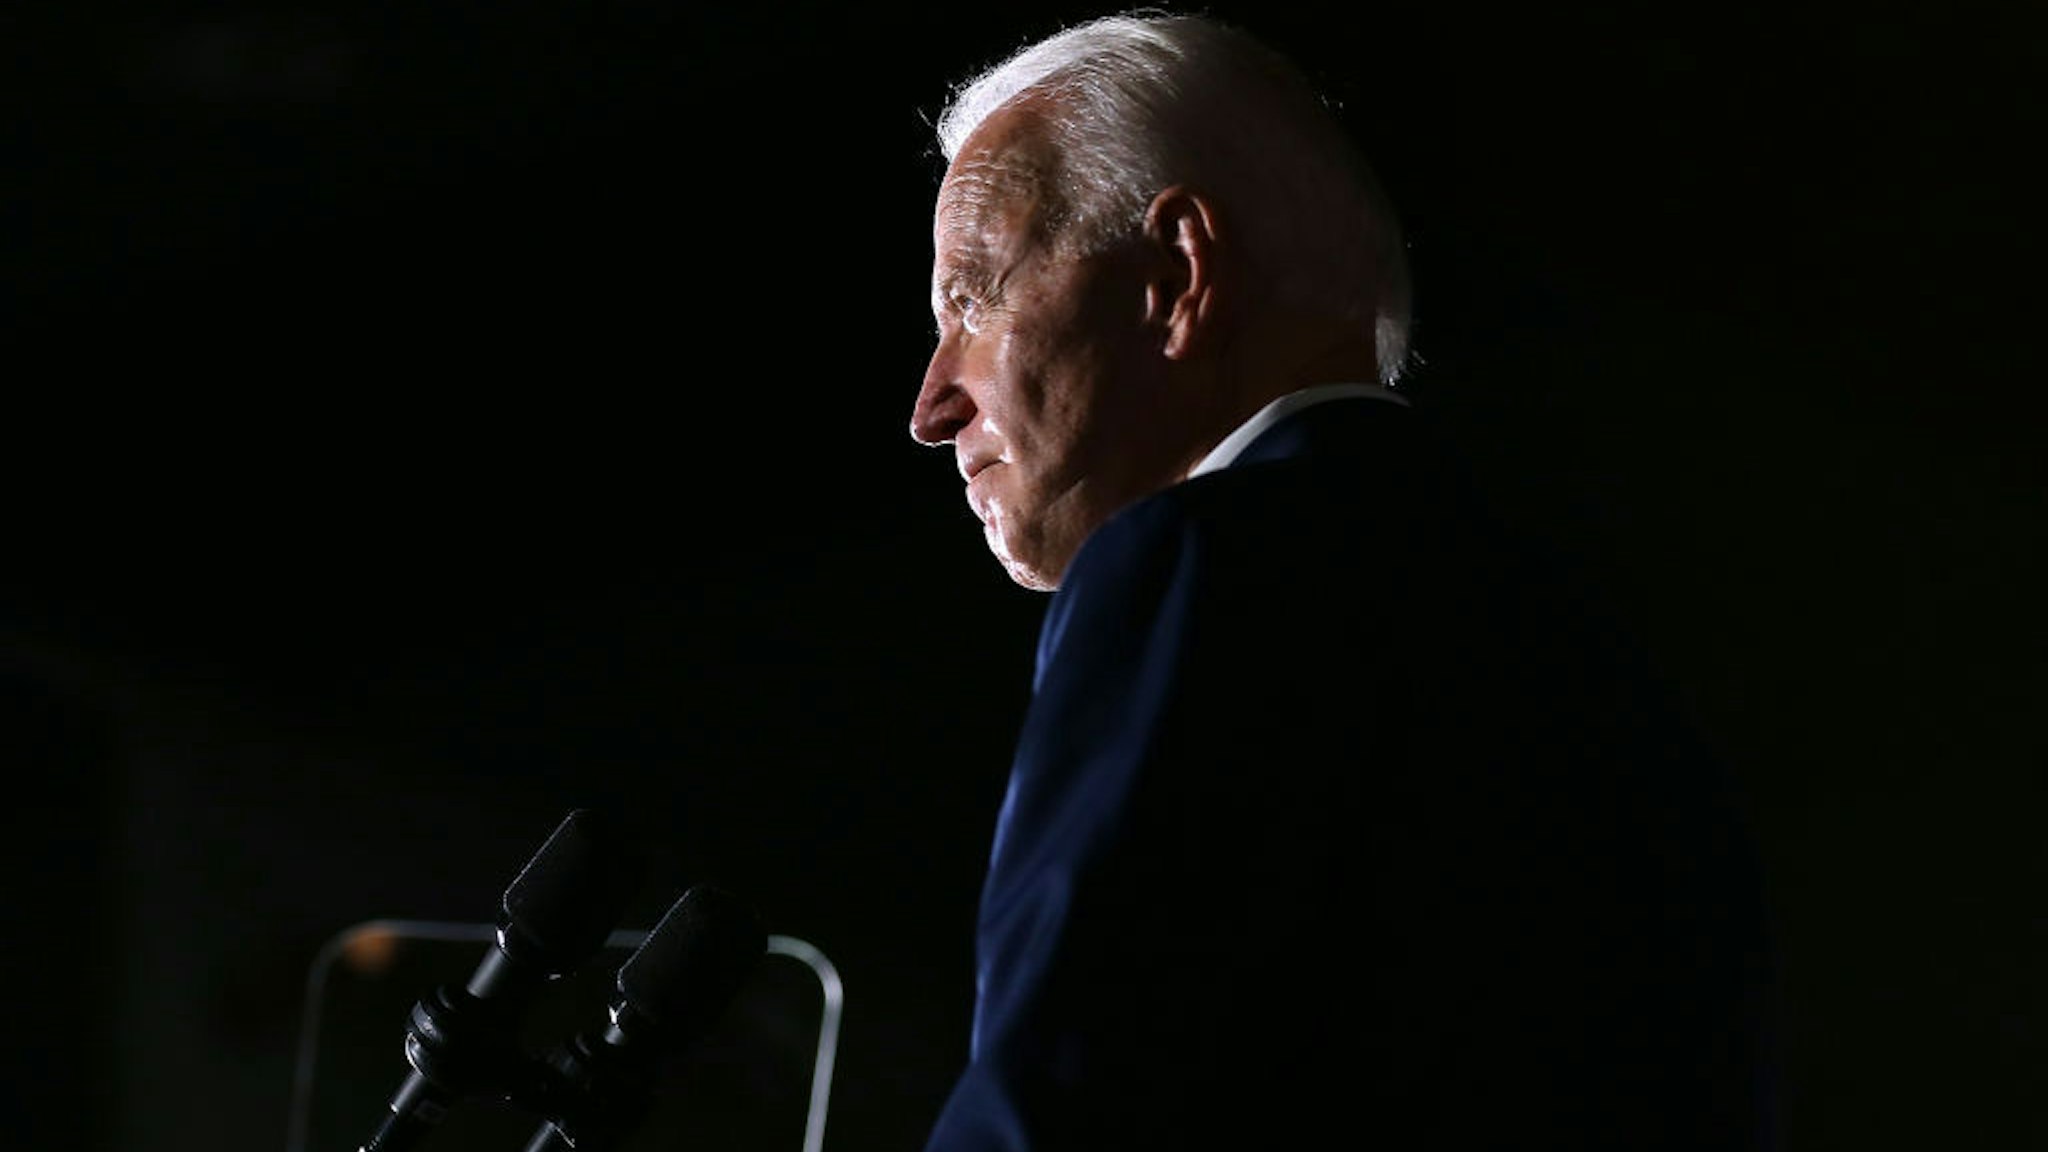 Democratic presidential candidate former Vice President Joe Biden reacts while giving a speech during a campaign event at Tougaloo College on March 08, 2020 in Tougaloo, Mississippi. Mississippi's Democratic primary will be held this Tuesday. (Photo by Jonathan Bachman/Getty Images)